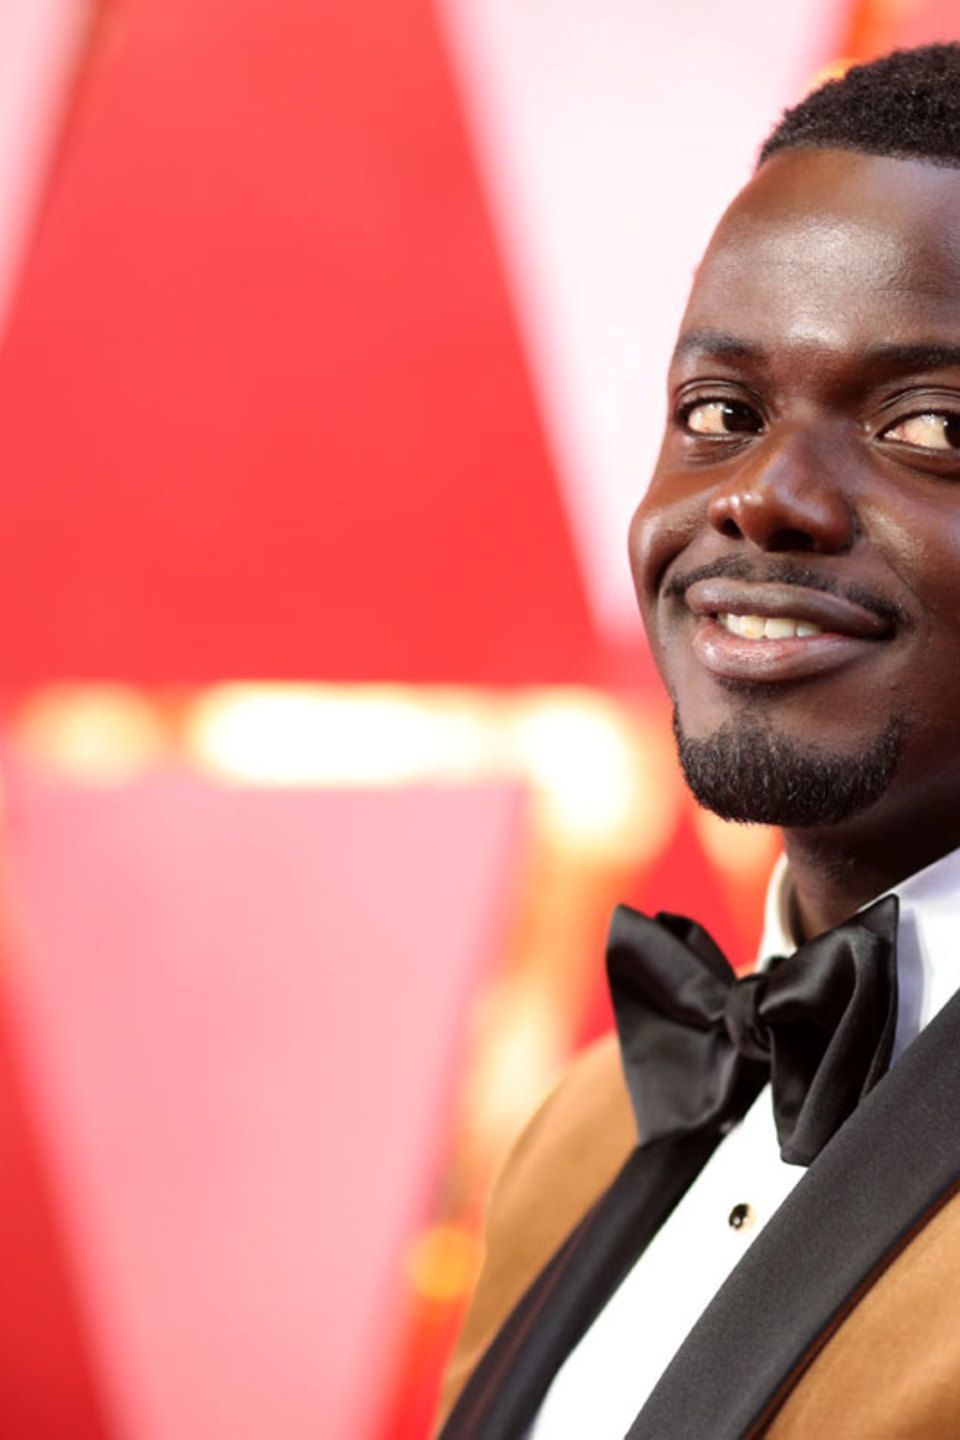  Daniel Kaluuya attends the 90th Annual Academy Awards at Hollywood & Highland Center on March 4, 2018 in Hollywood, California. (Photo by Christopher Polk/Getty Images)